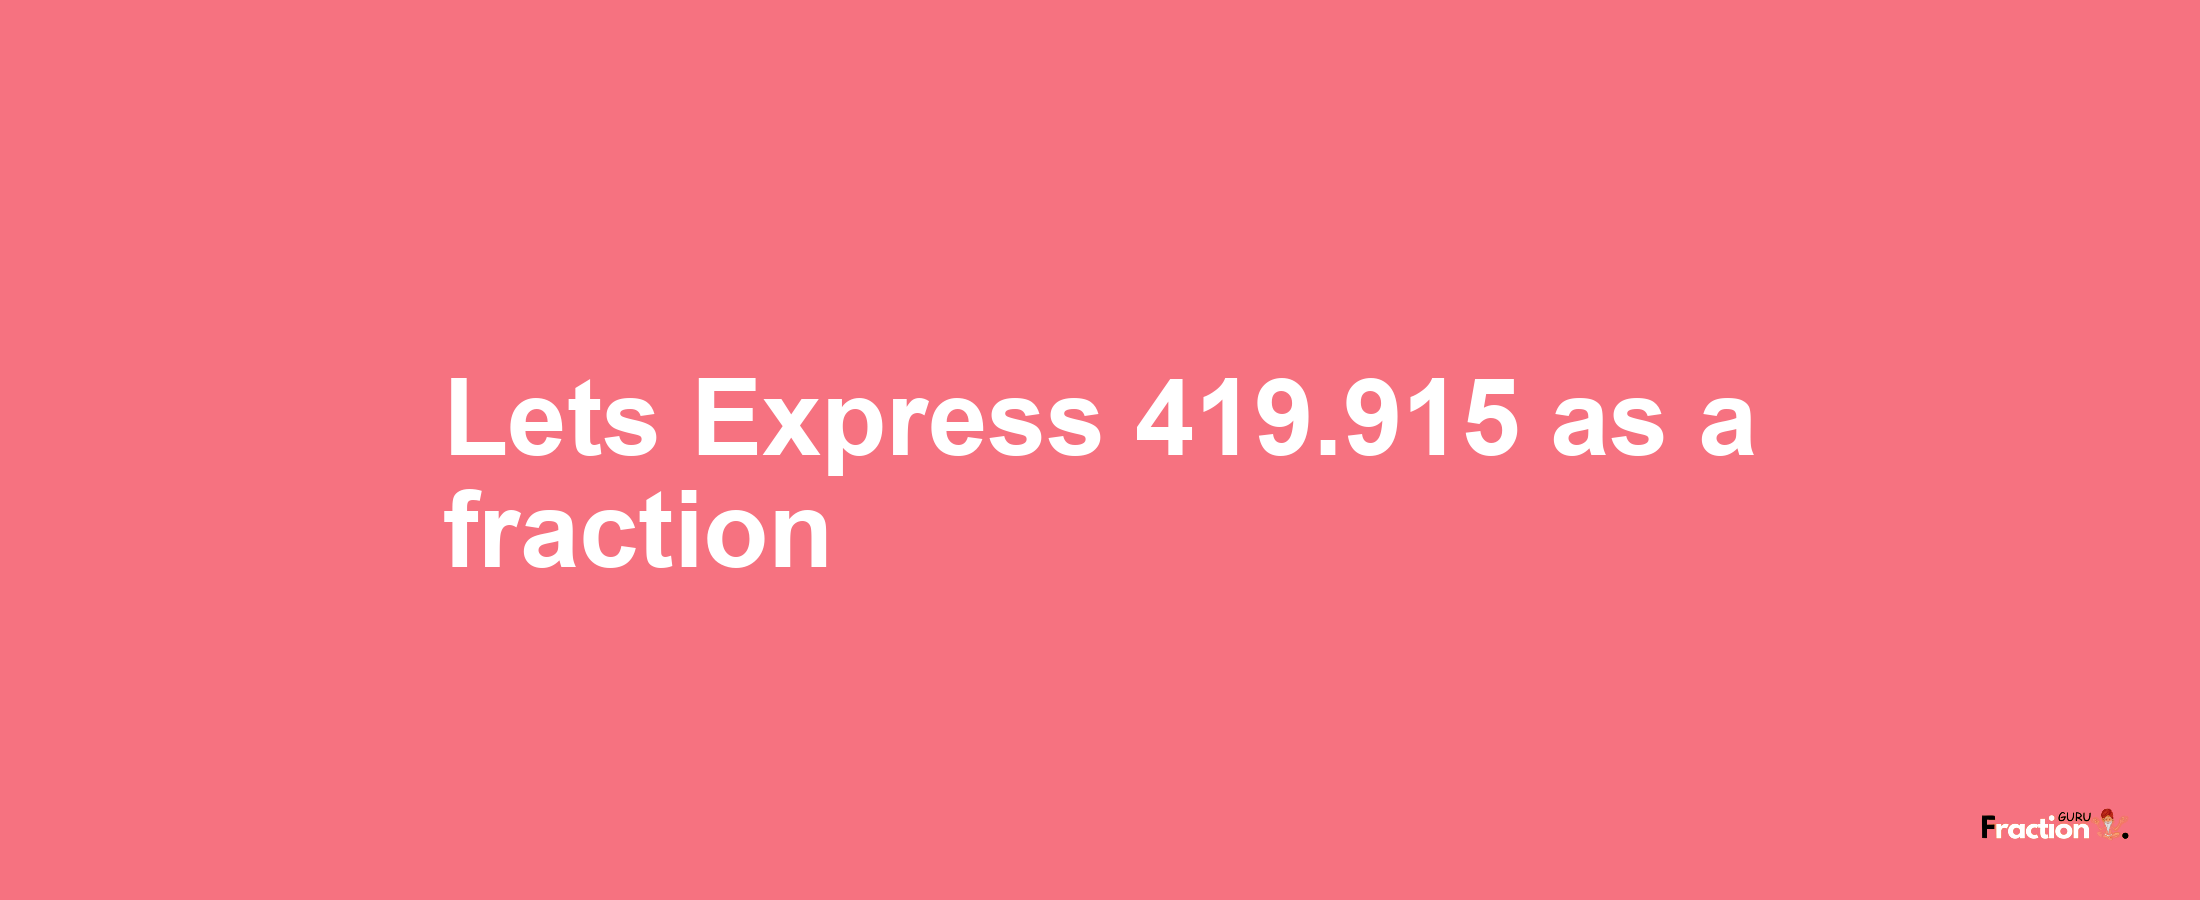 Lets Express 419.915 as afraction